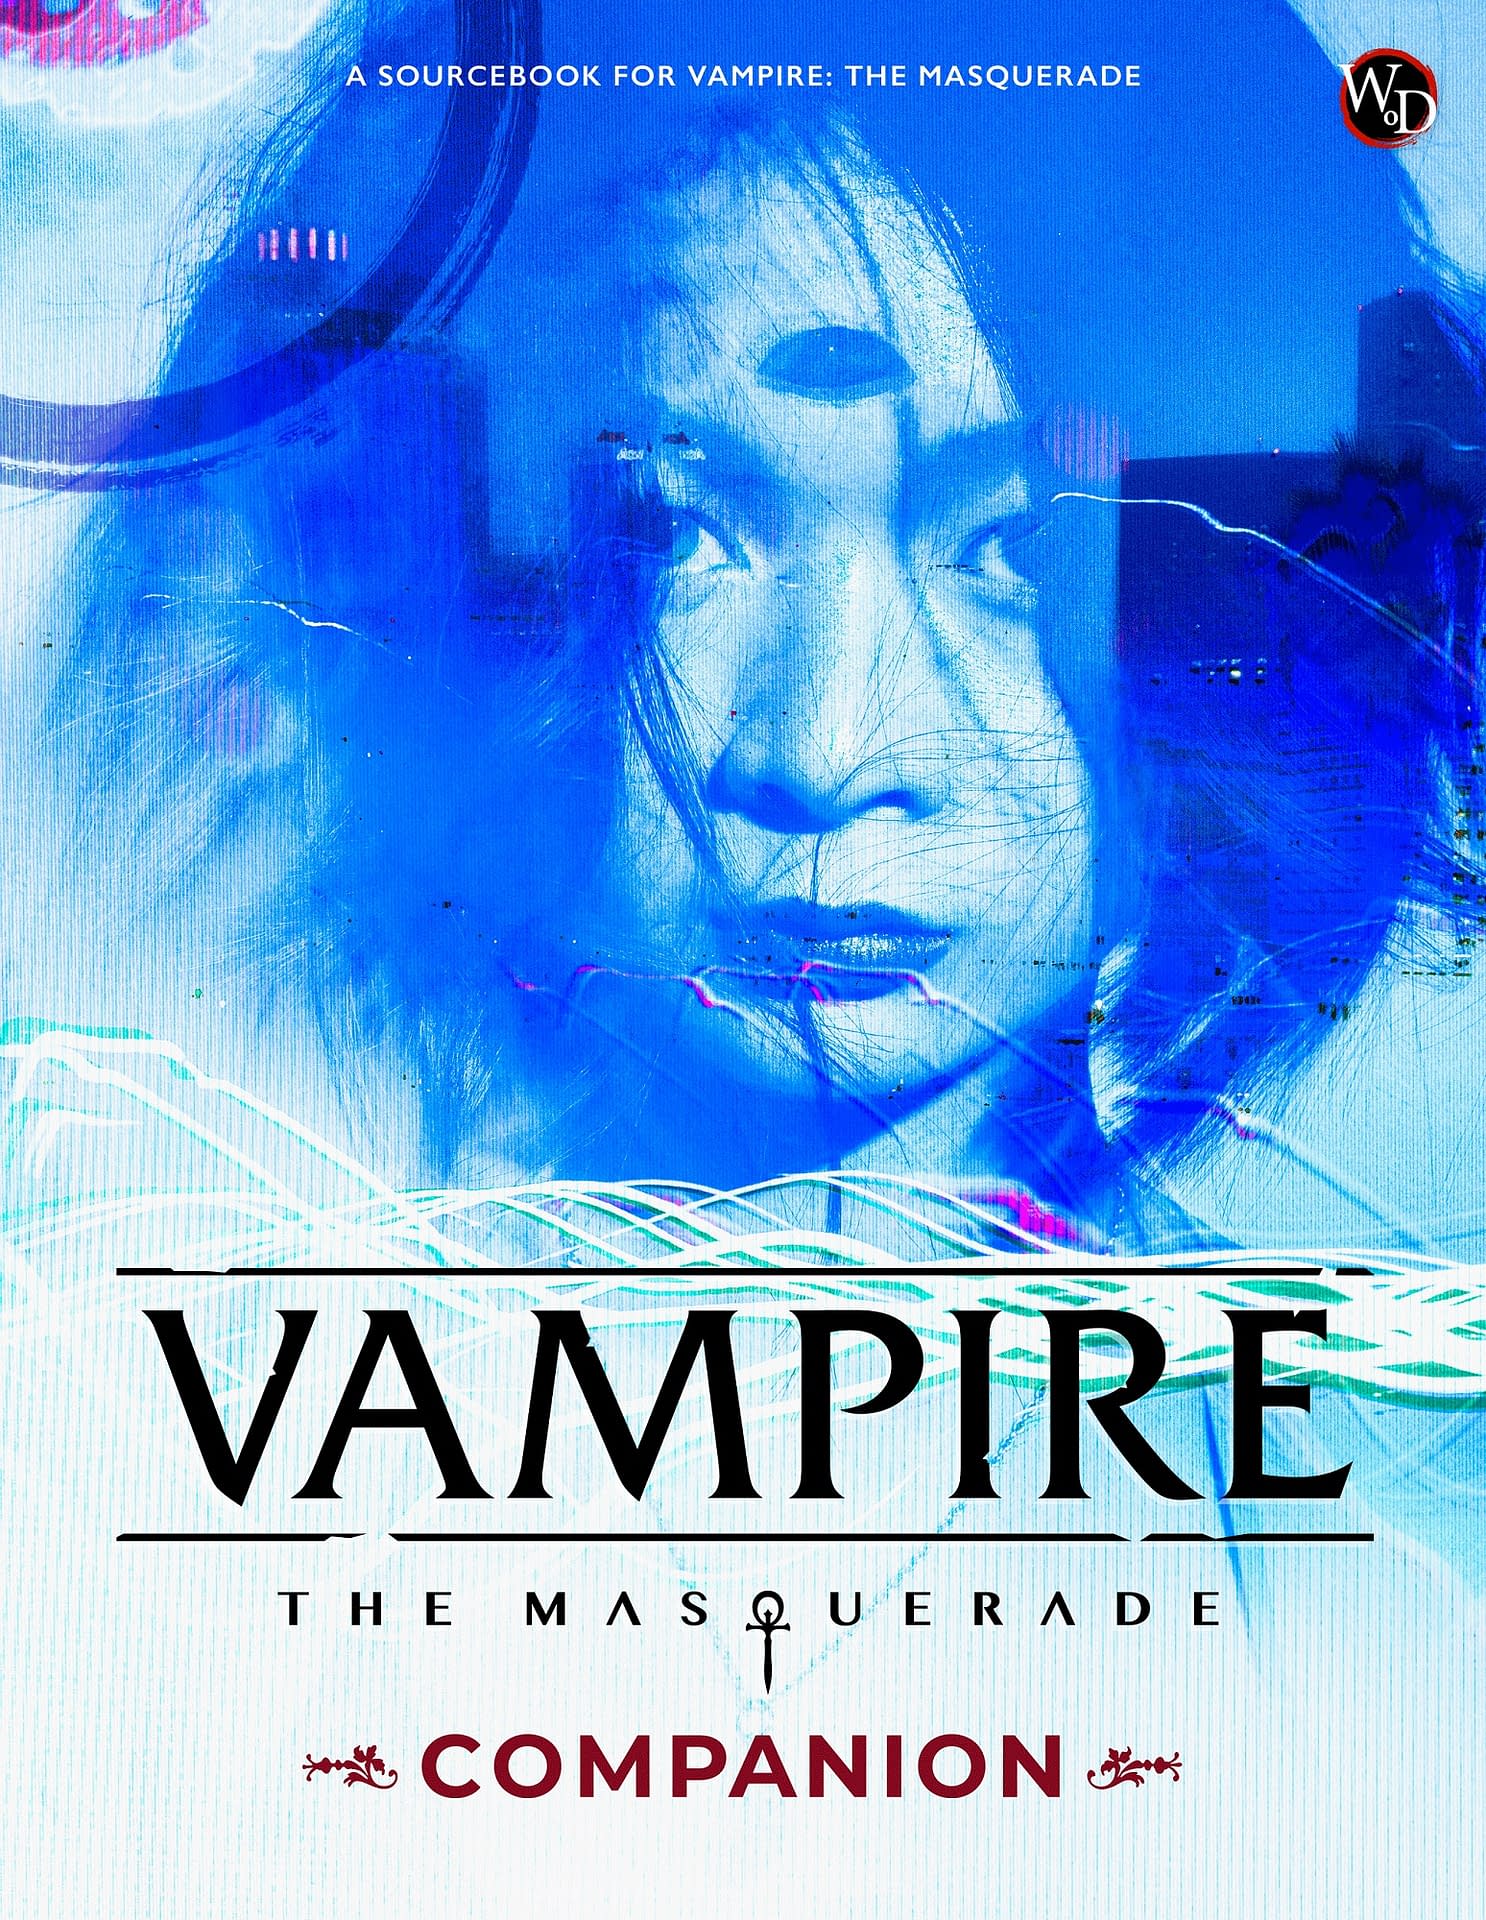 Play Vampire: The Masquerade 5th Edition Online